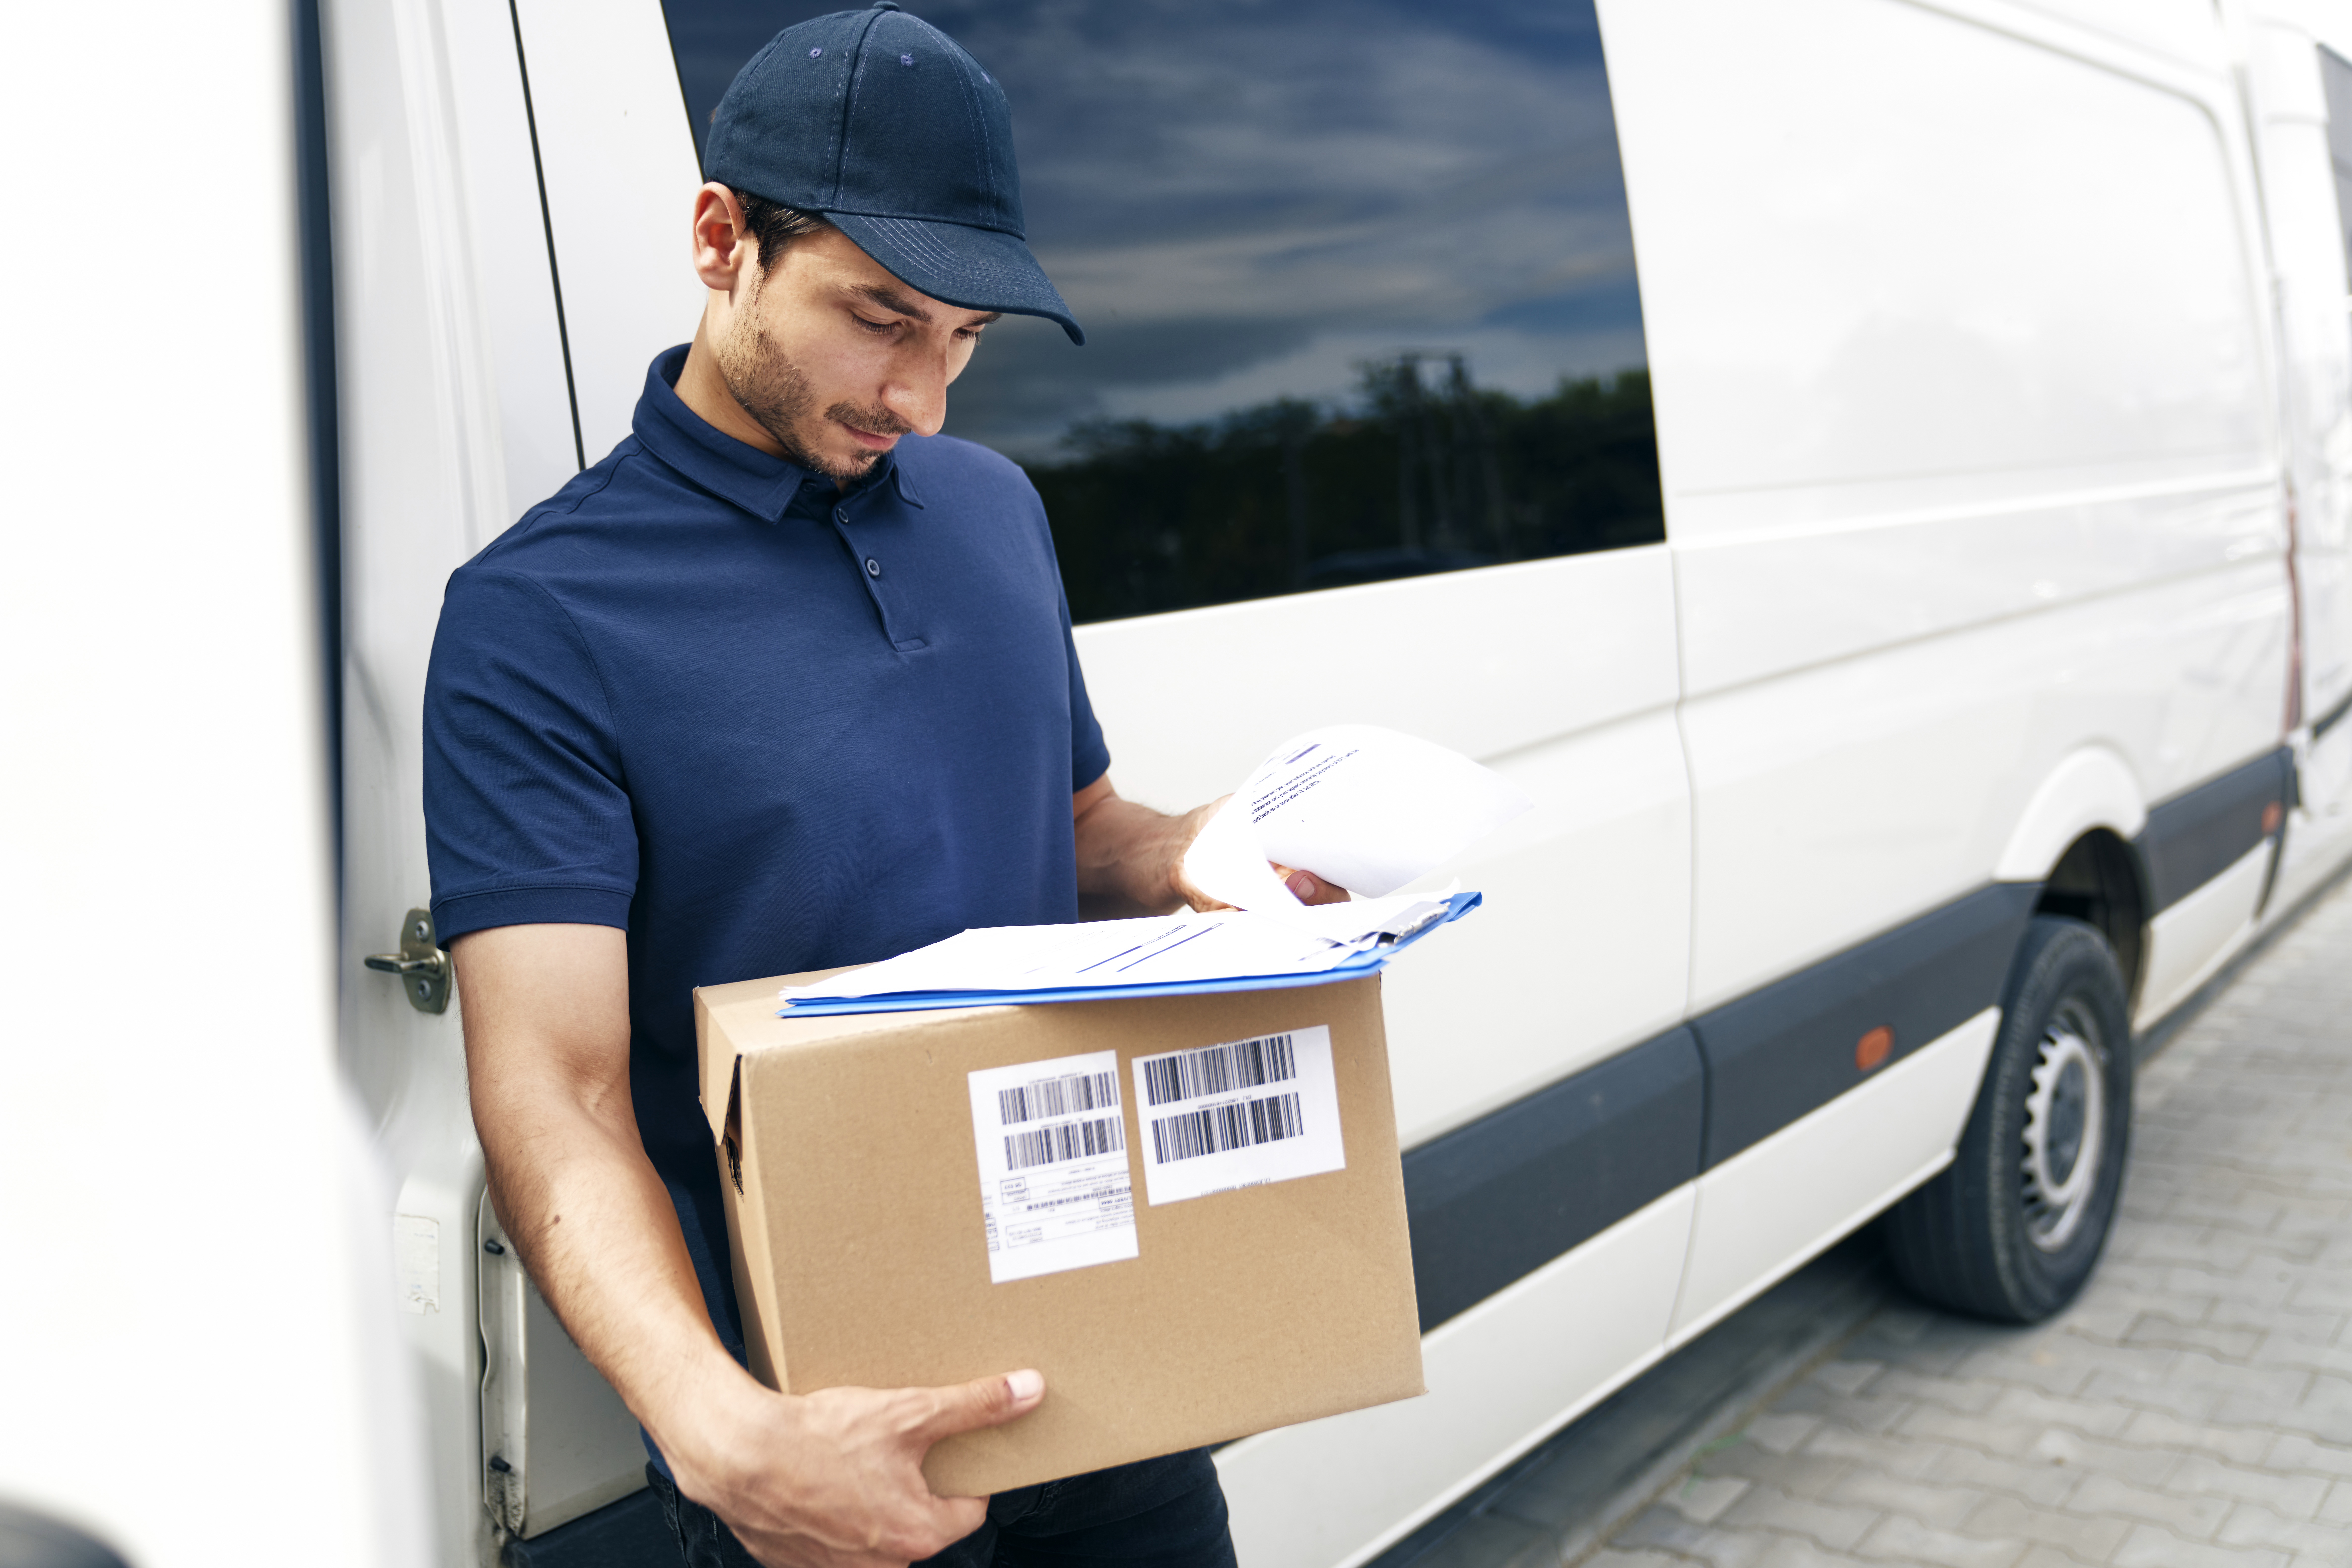  courier checking shipping address